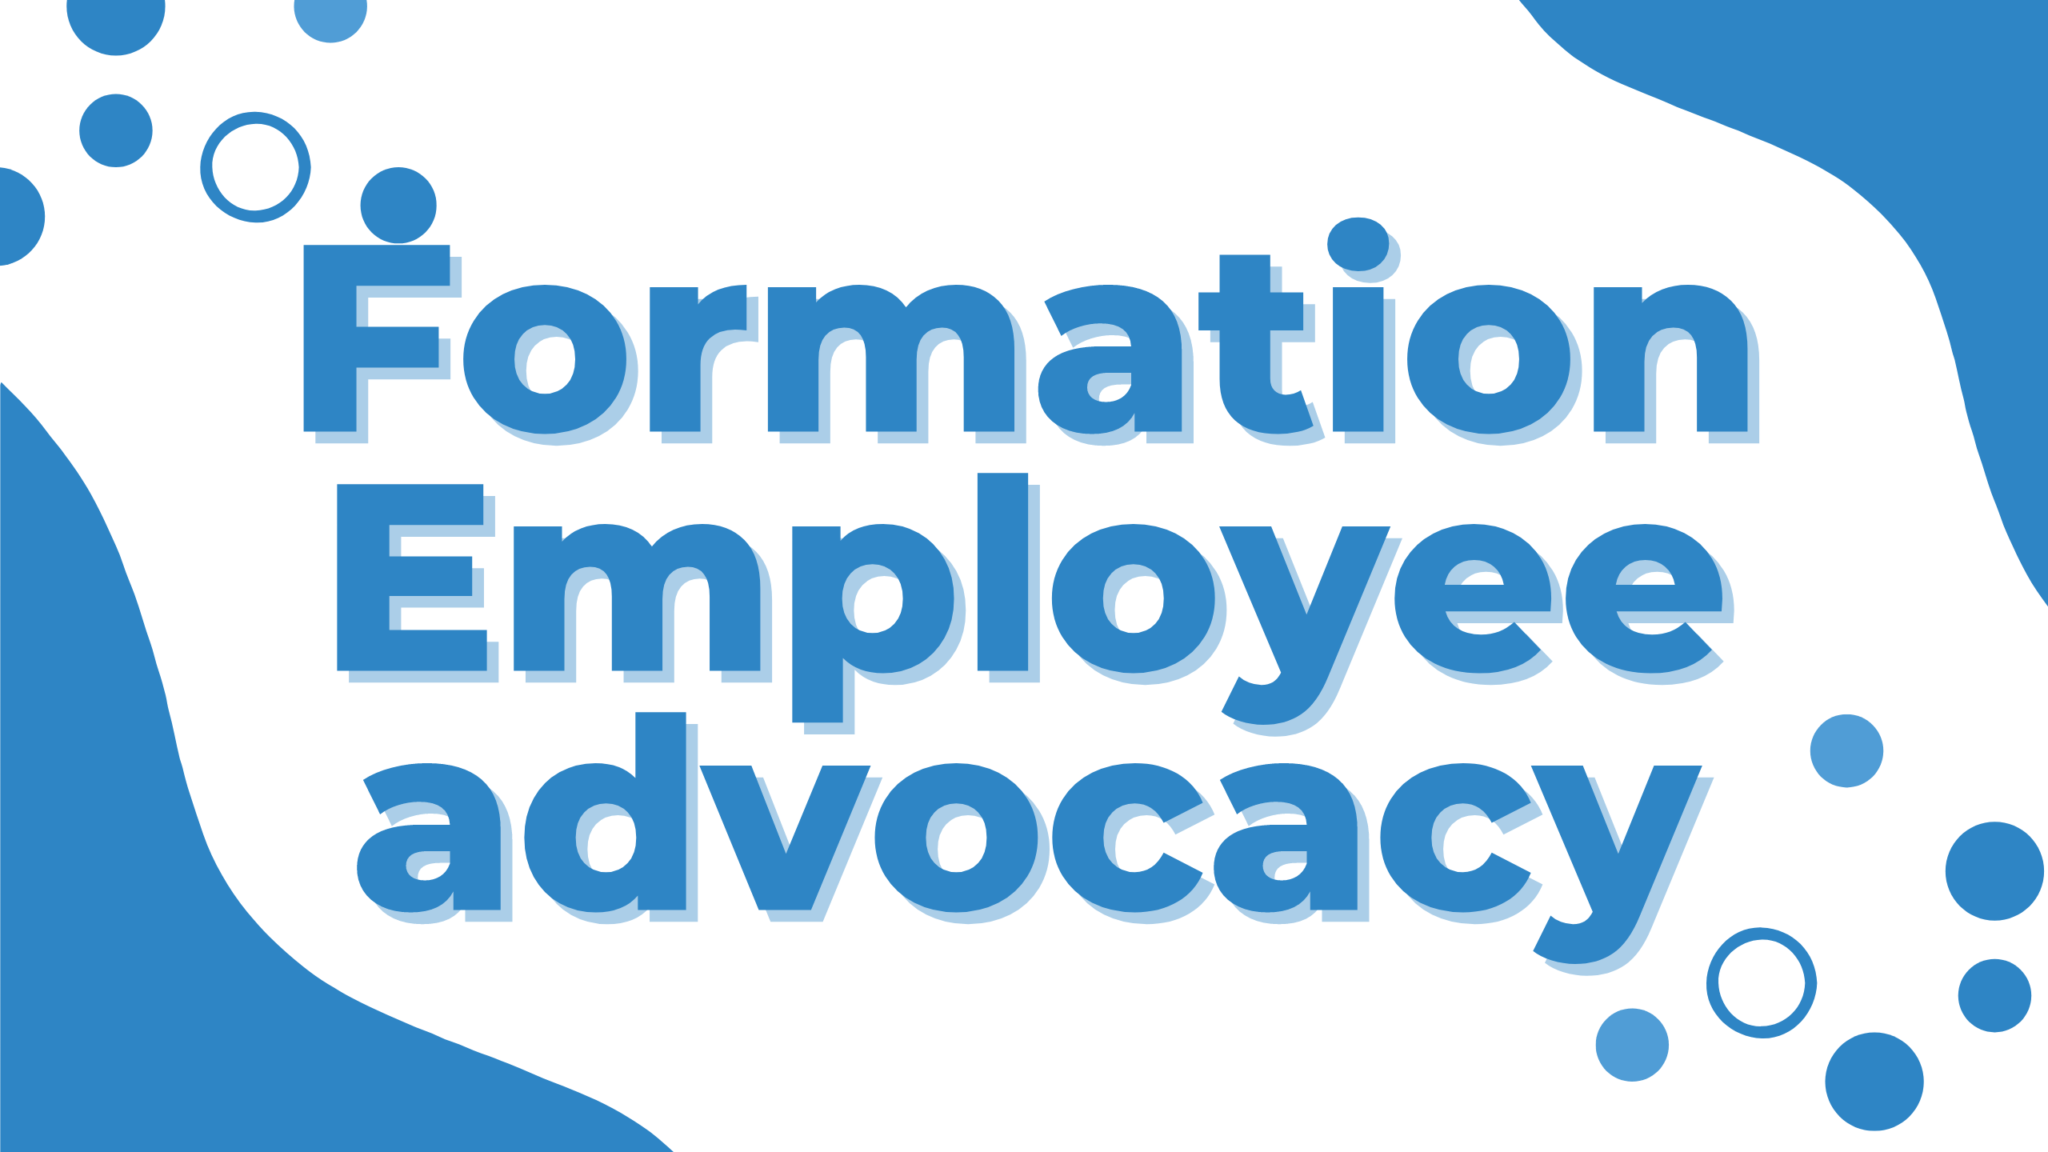 Formation Employee advocacy Degraux